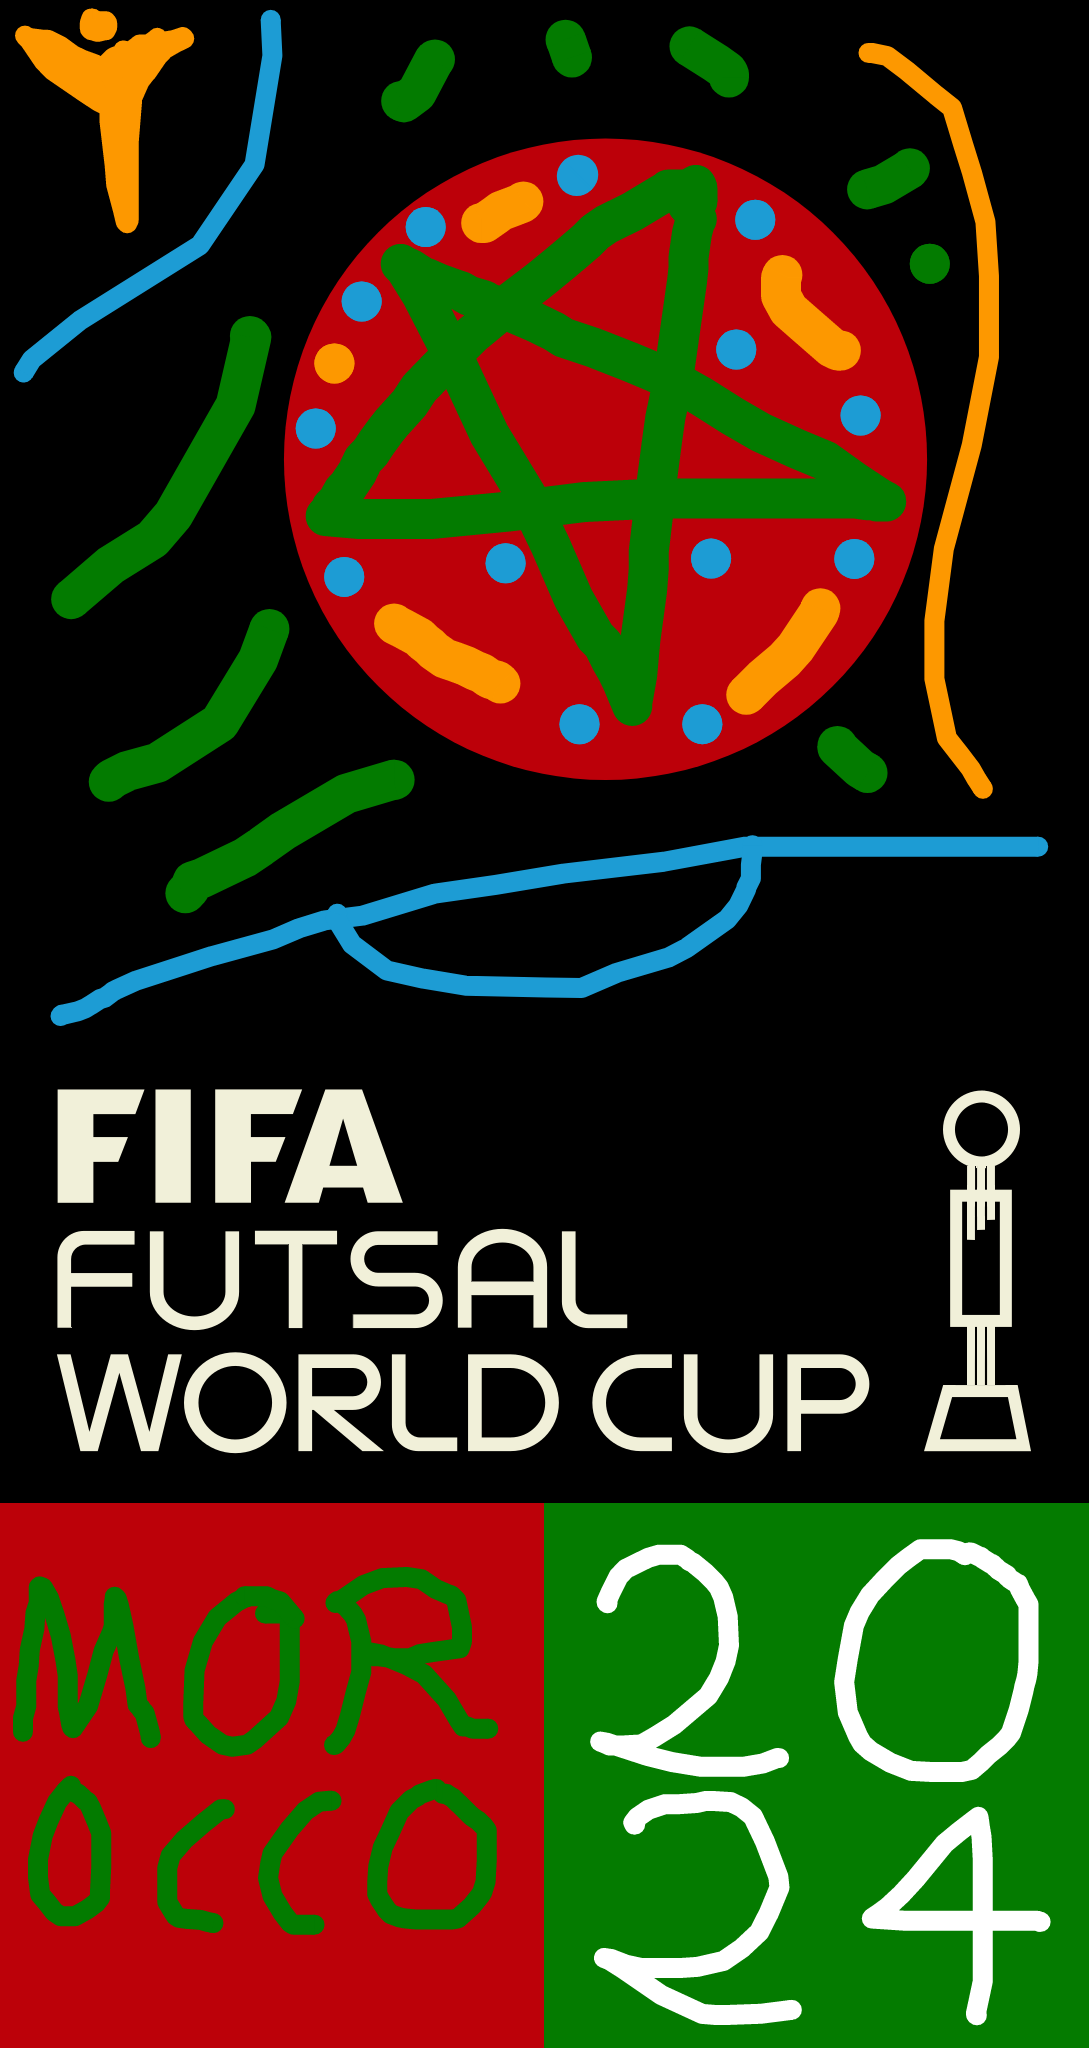 FIFA Futsal World Cup 2024 Morocco Logo (2.0) by PaintRubber38 on